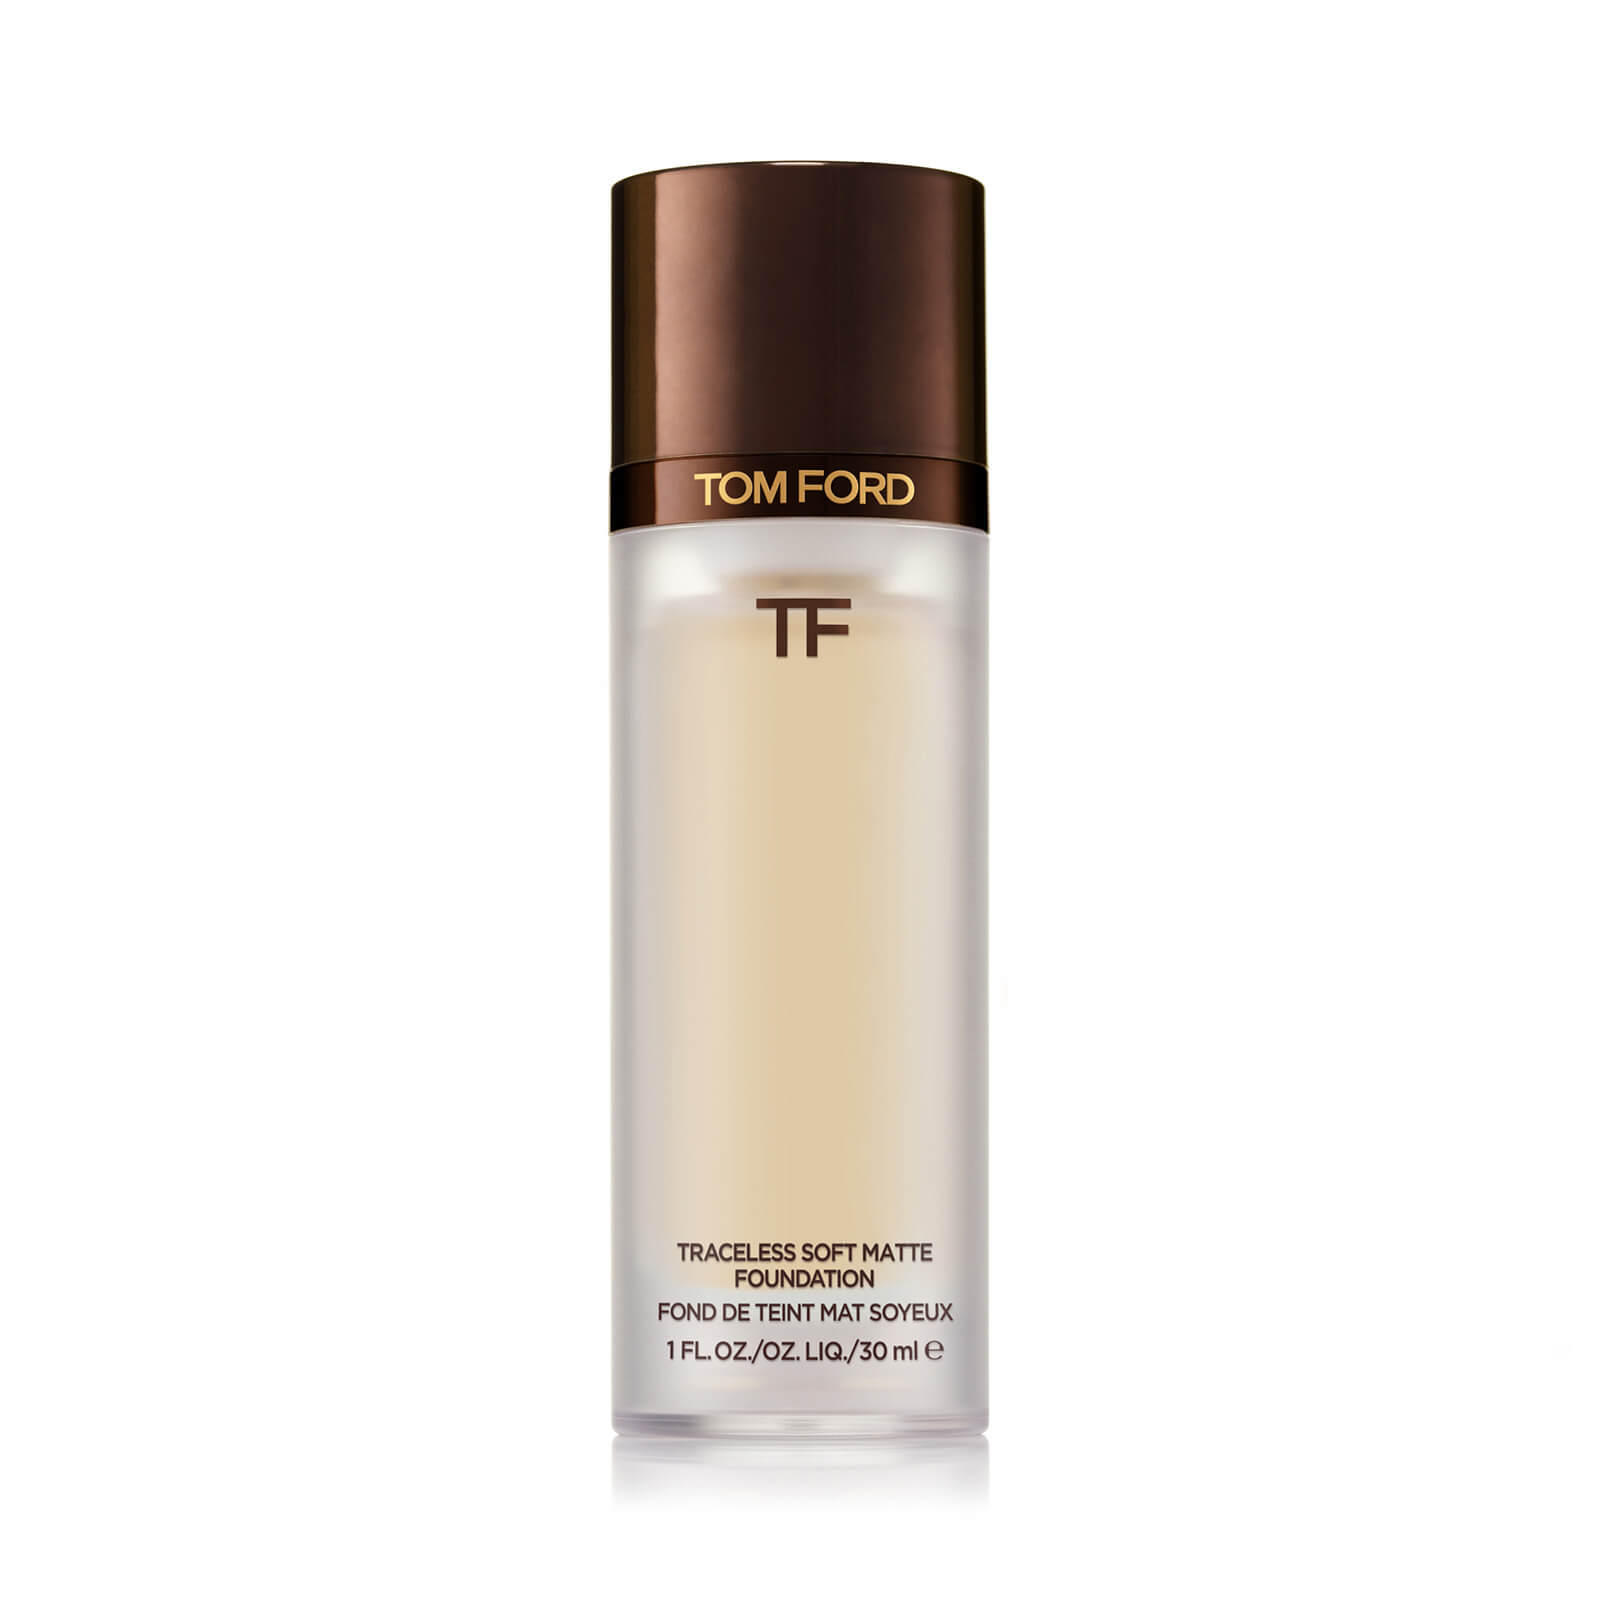 Tom Ford Traceless Soft Matte Foundation 30ml (Various Shades) - Warm Sand